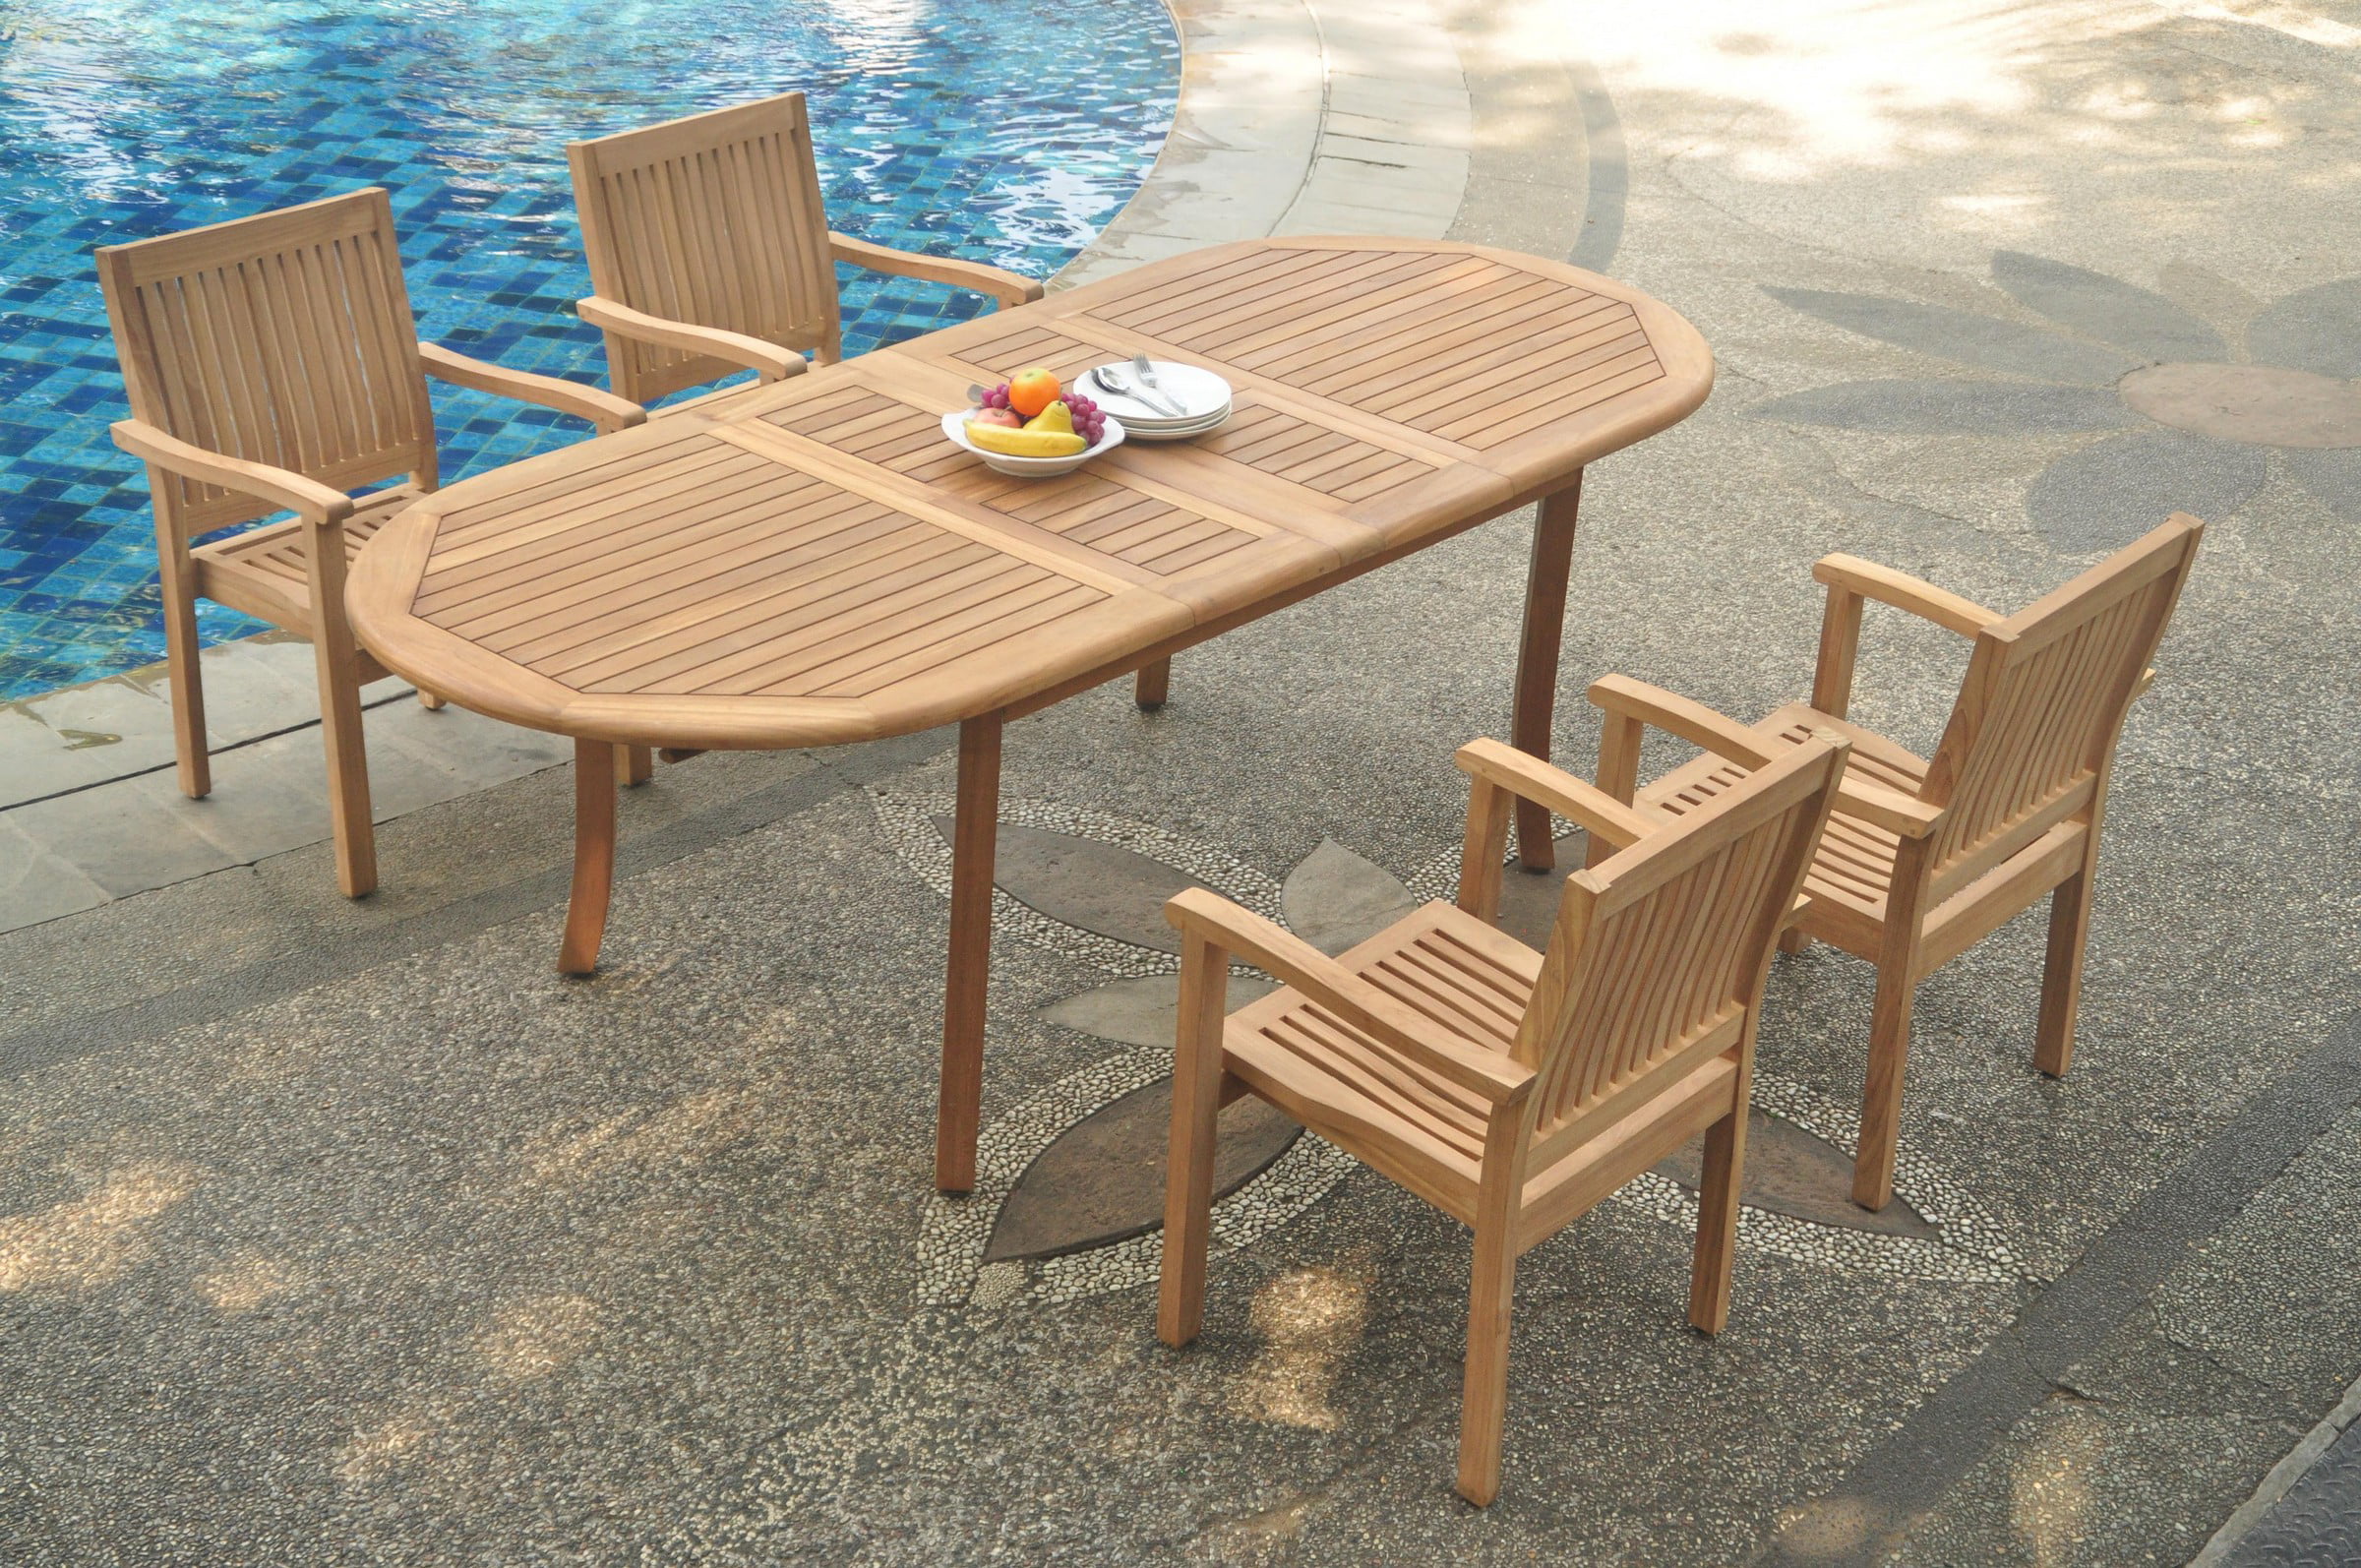 How To Choose The Right Teak Furniture